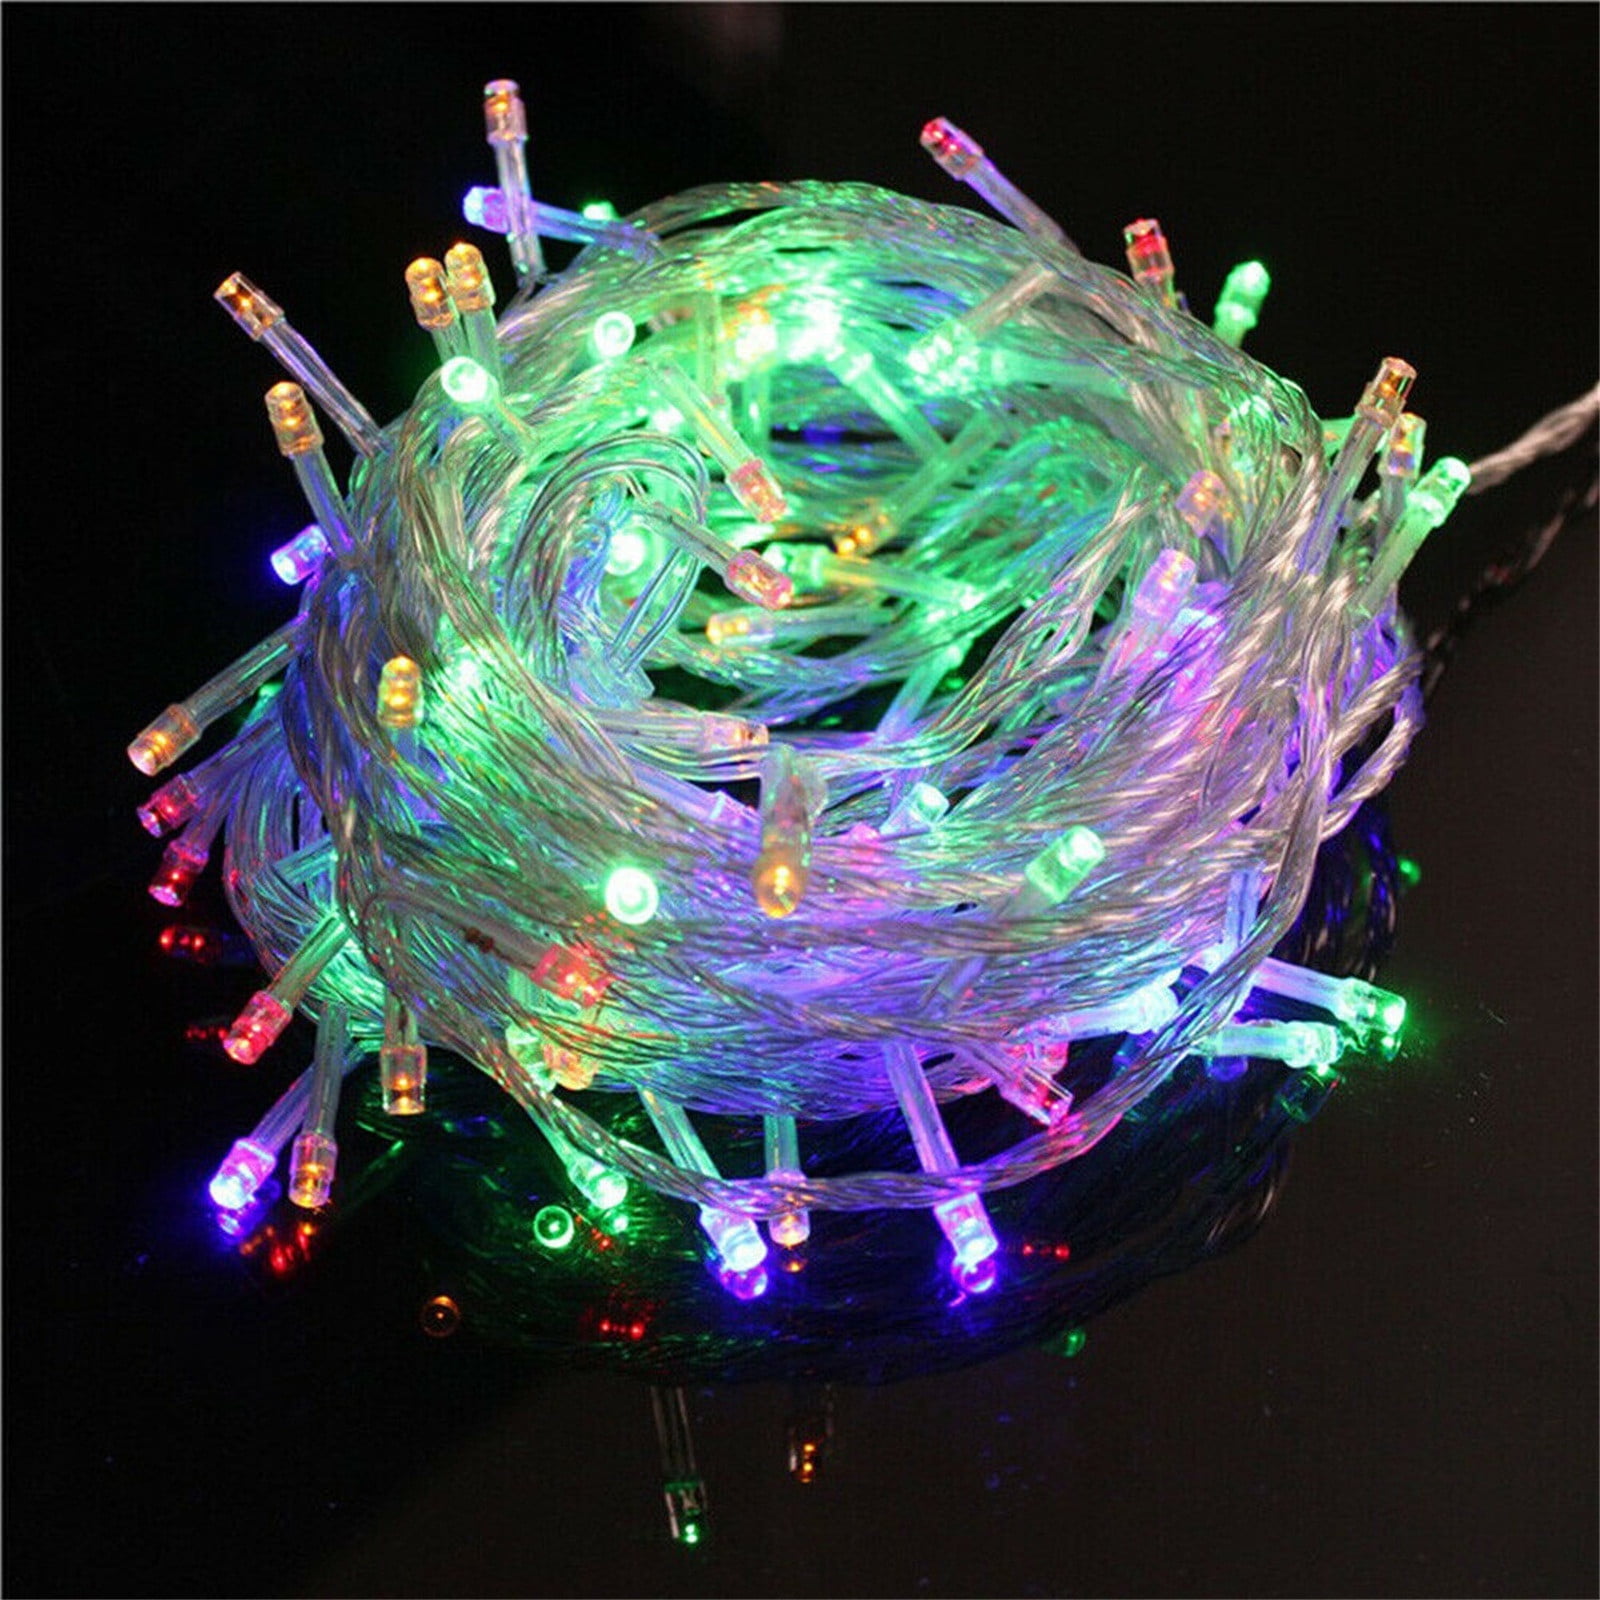 Details about   100-1000 LED Fairy String Lights Plug In Xmas Tree Wedding Party Decor Outdoor